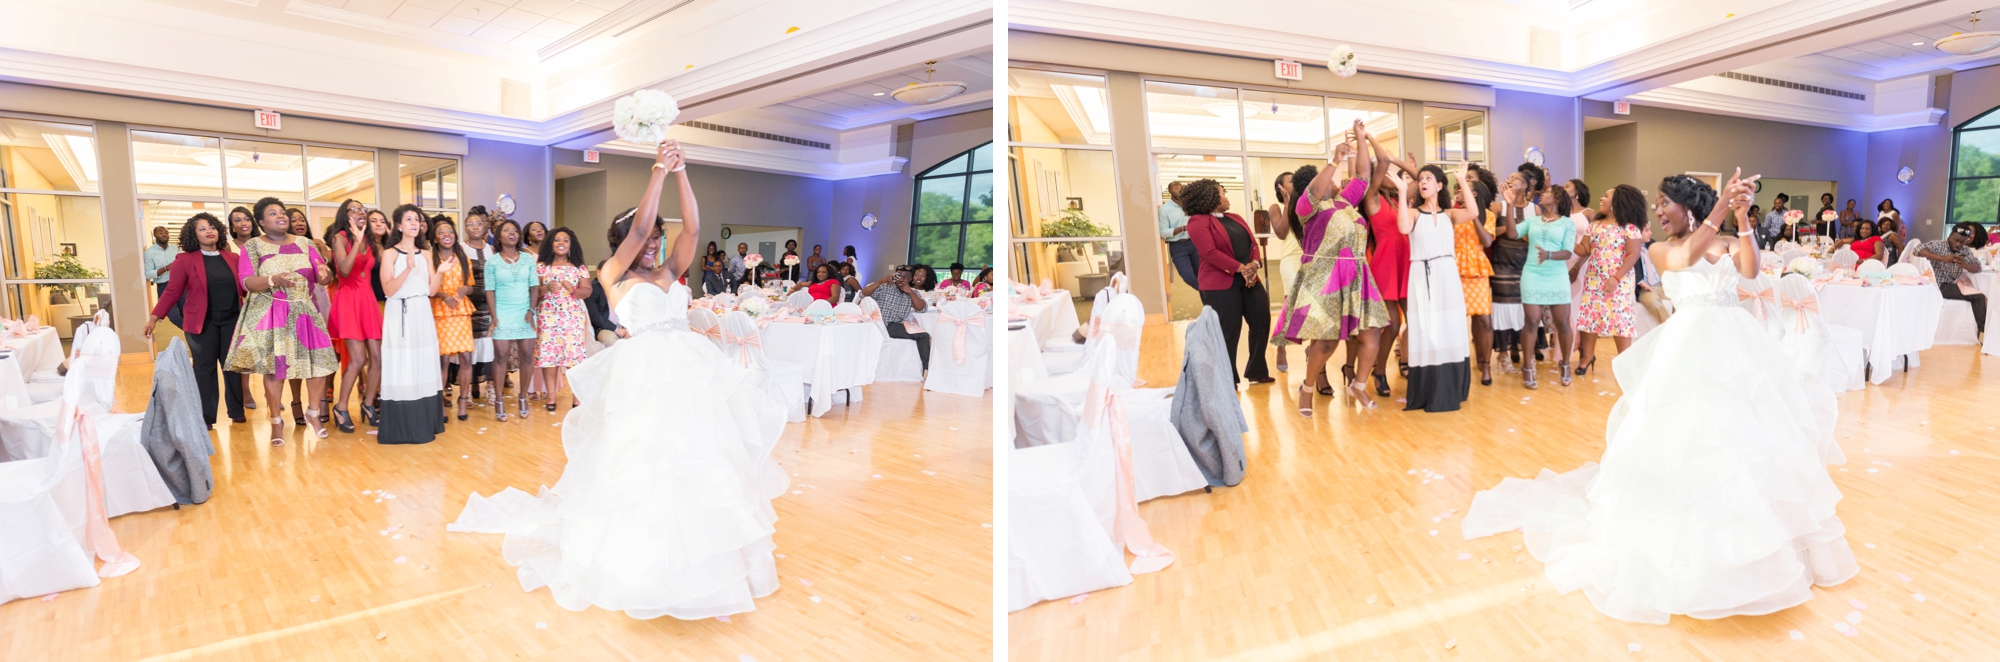 beautiful-wedding-at-westerville-recreation-center-westerville-ohio-85